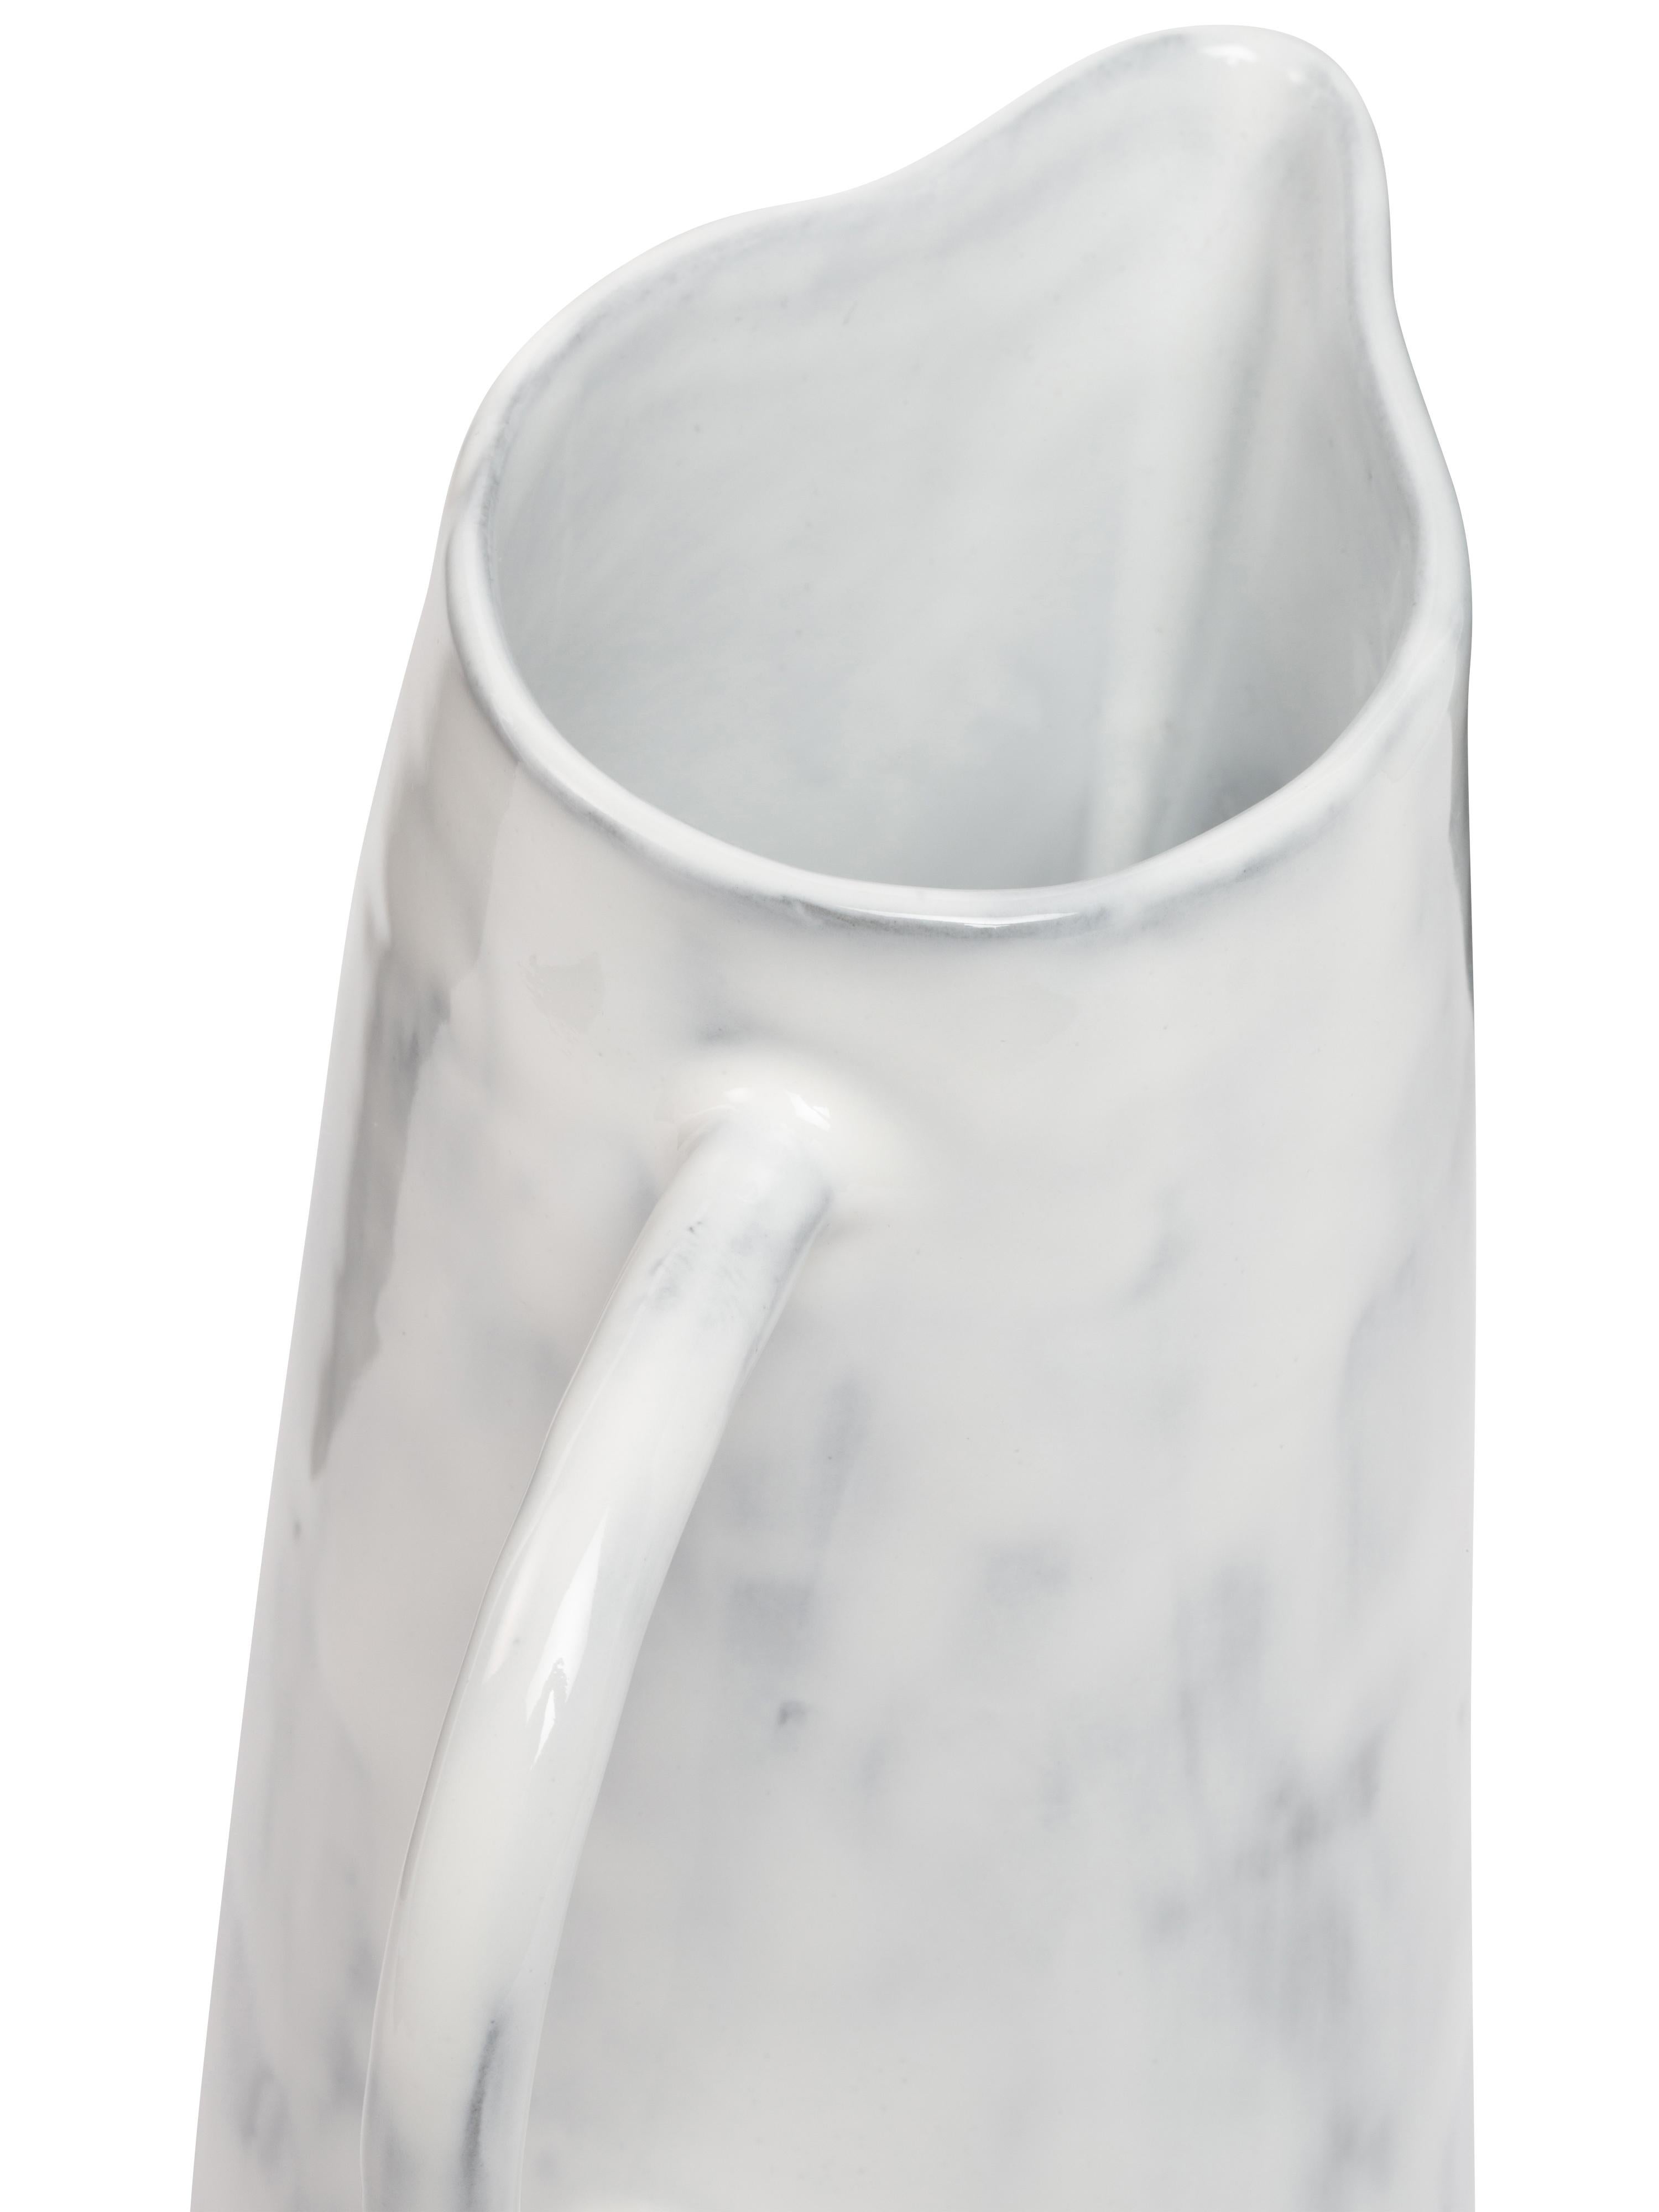 This object has been made from ceramic using an artisan method. Each piece is unique in terms of finish, colours and details. Waterjug finish is glossy inside and outisde, hand painted in taupe and white. Logo is impressed on the back.
By Virgil